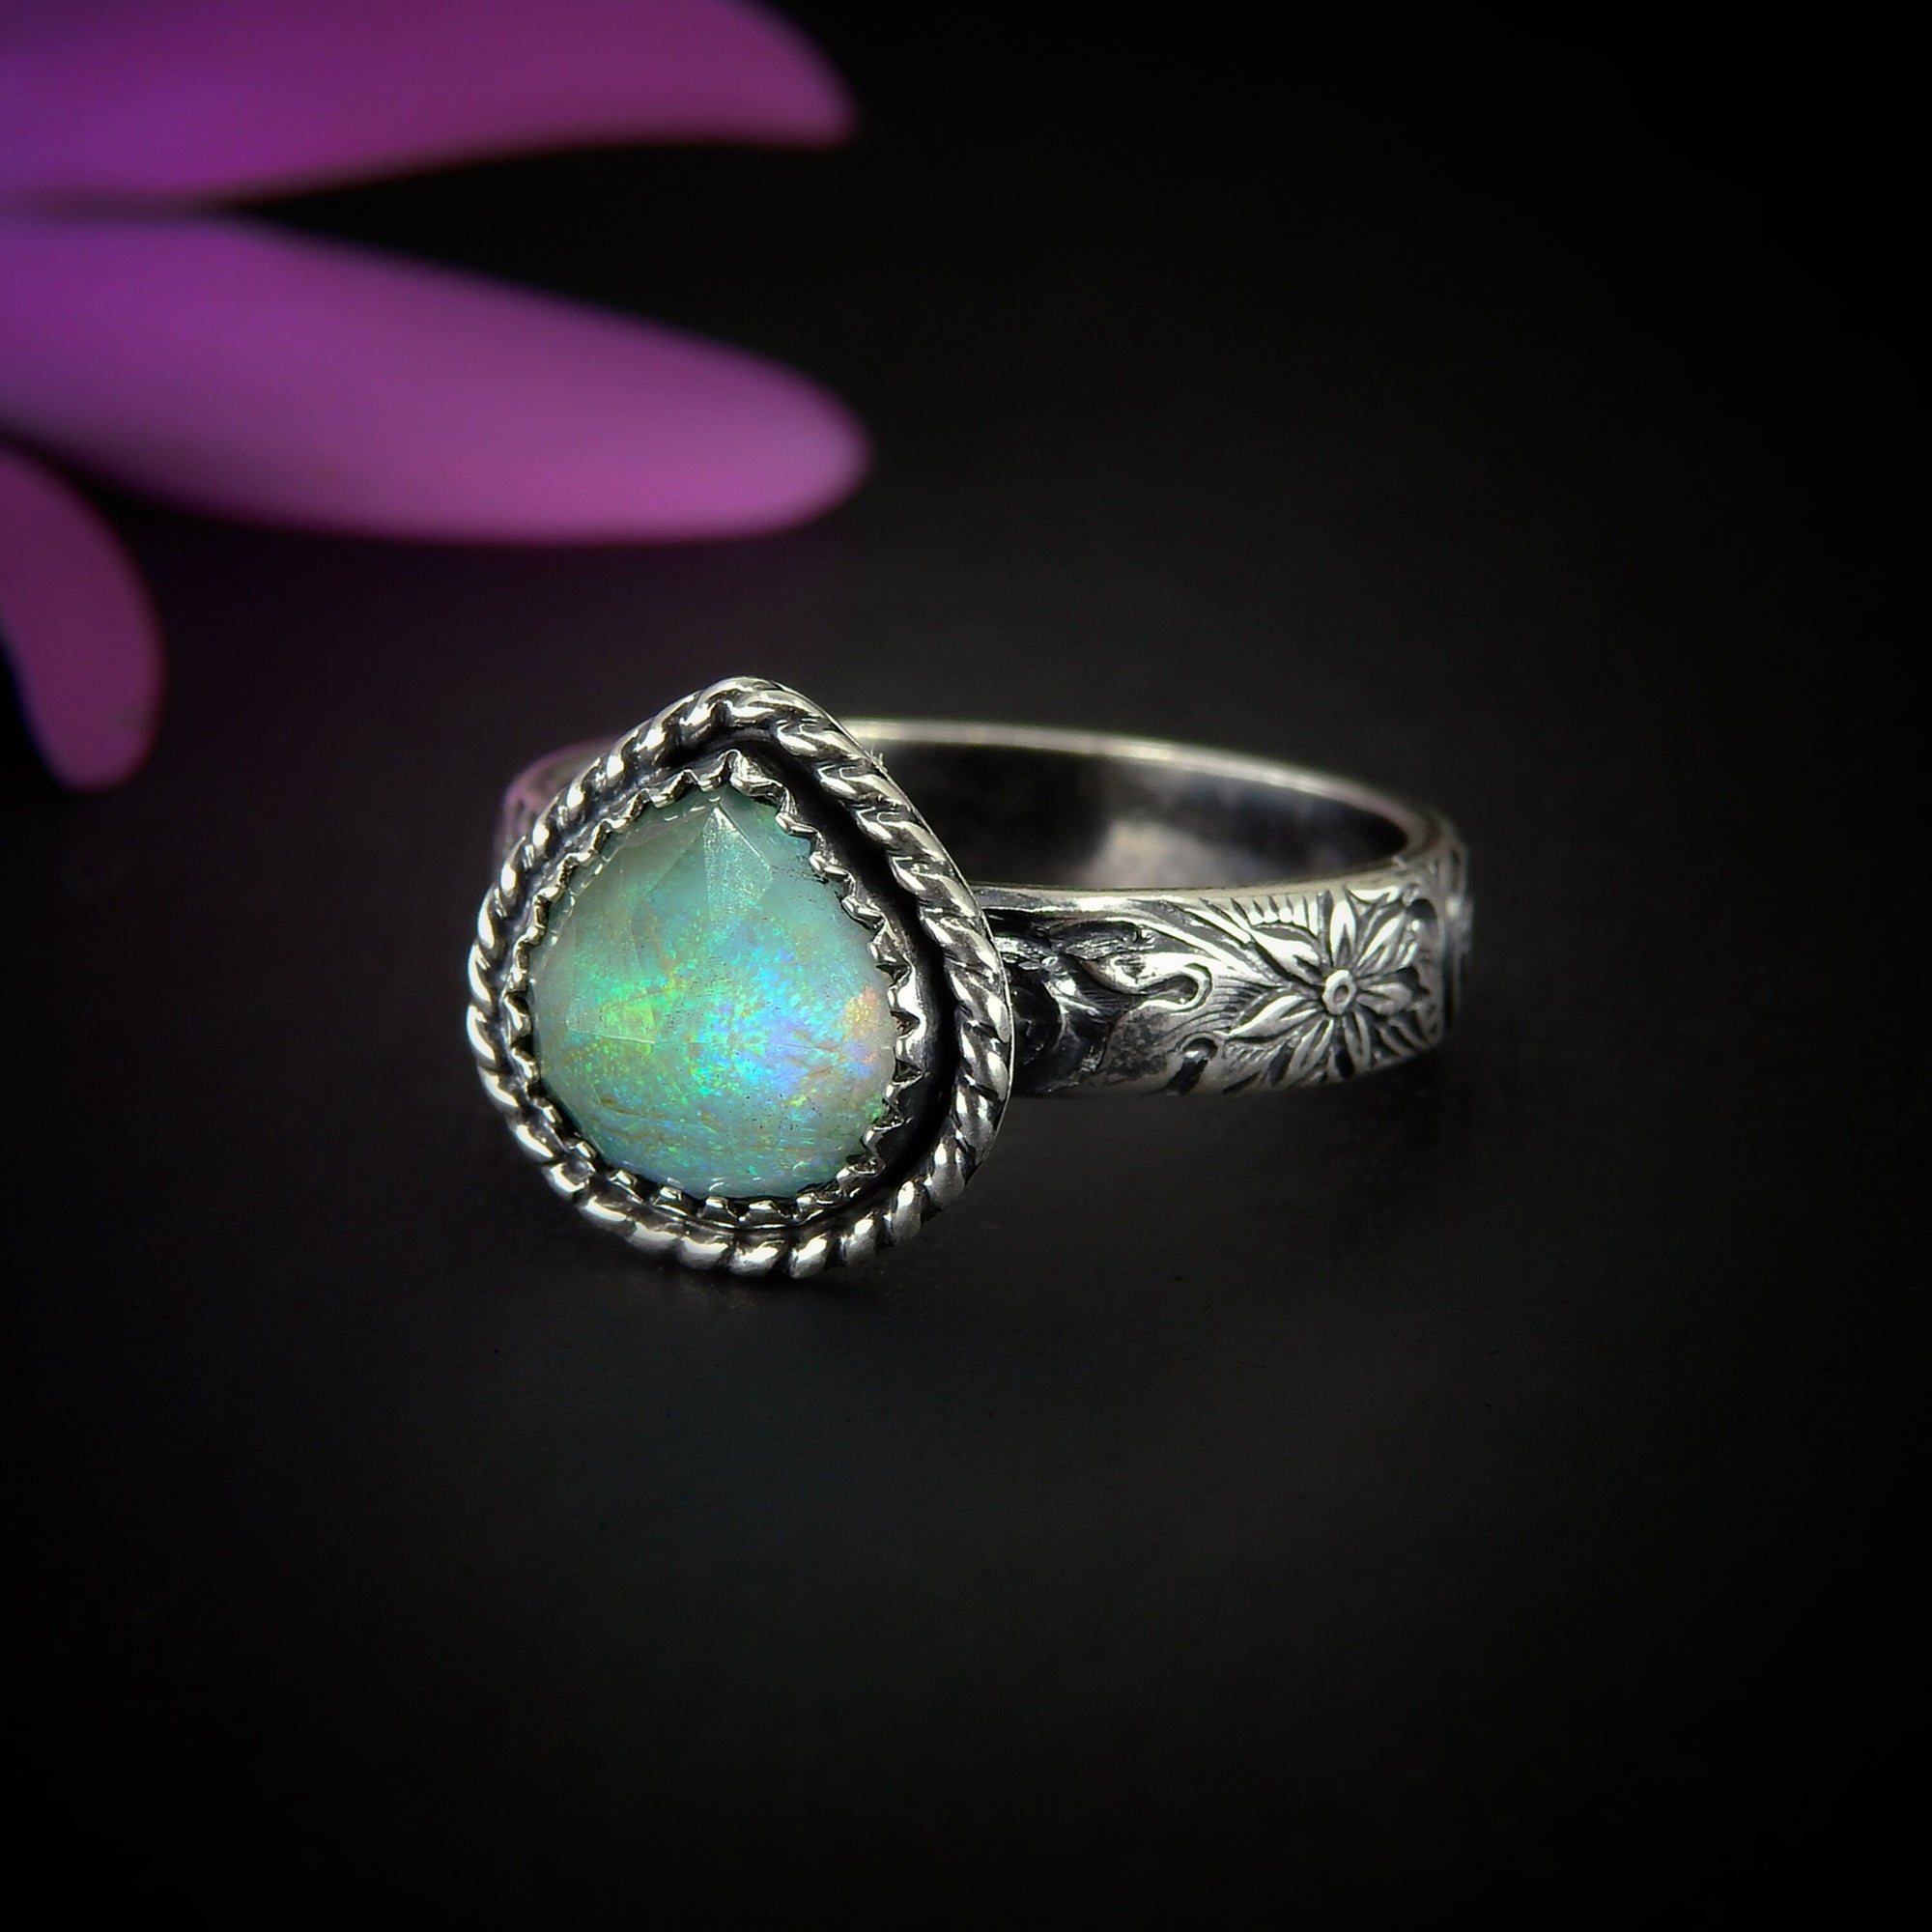 Rose Cut Clear Quartz & Monarch Opal Ring - Size 11 1/4 - Sterling Silver - Rainbow Opal Jewellery - Thick Floral Ring Band Rainbow Crystal